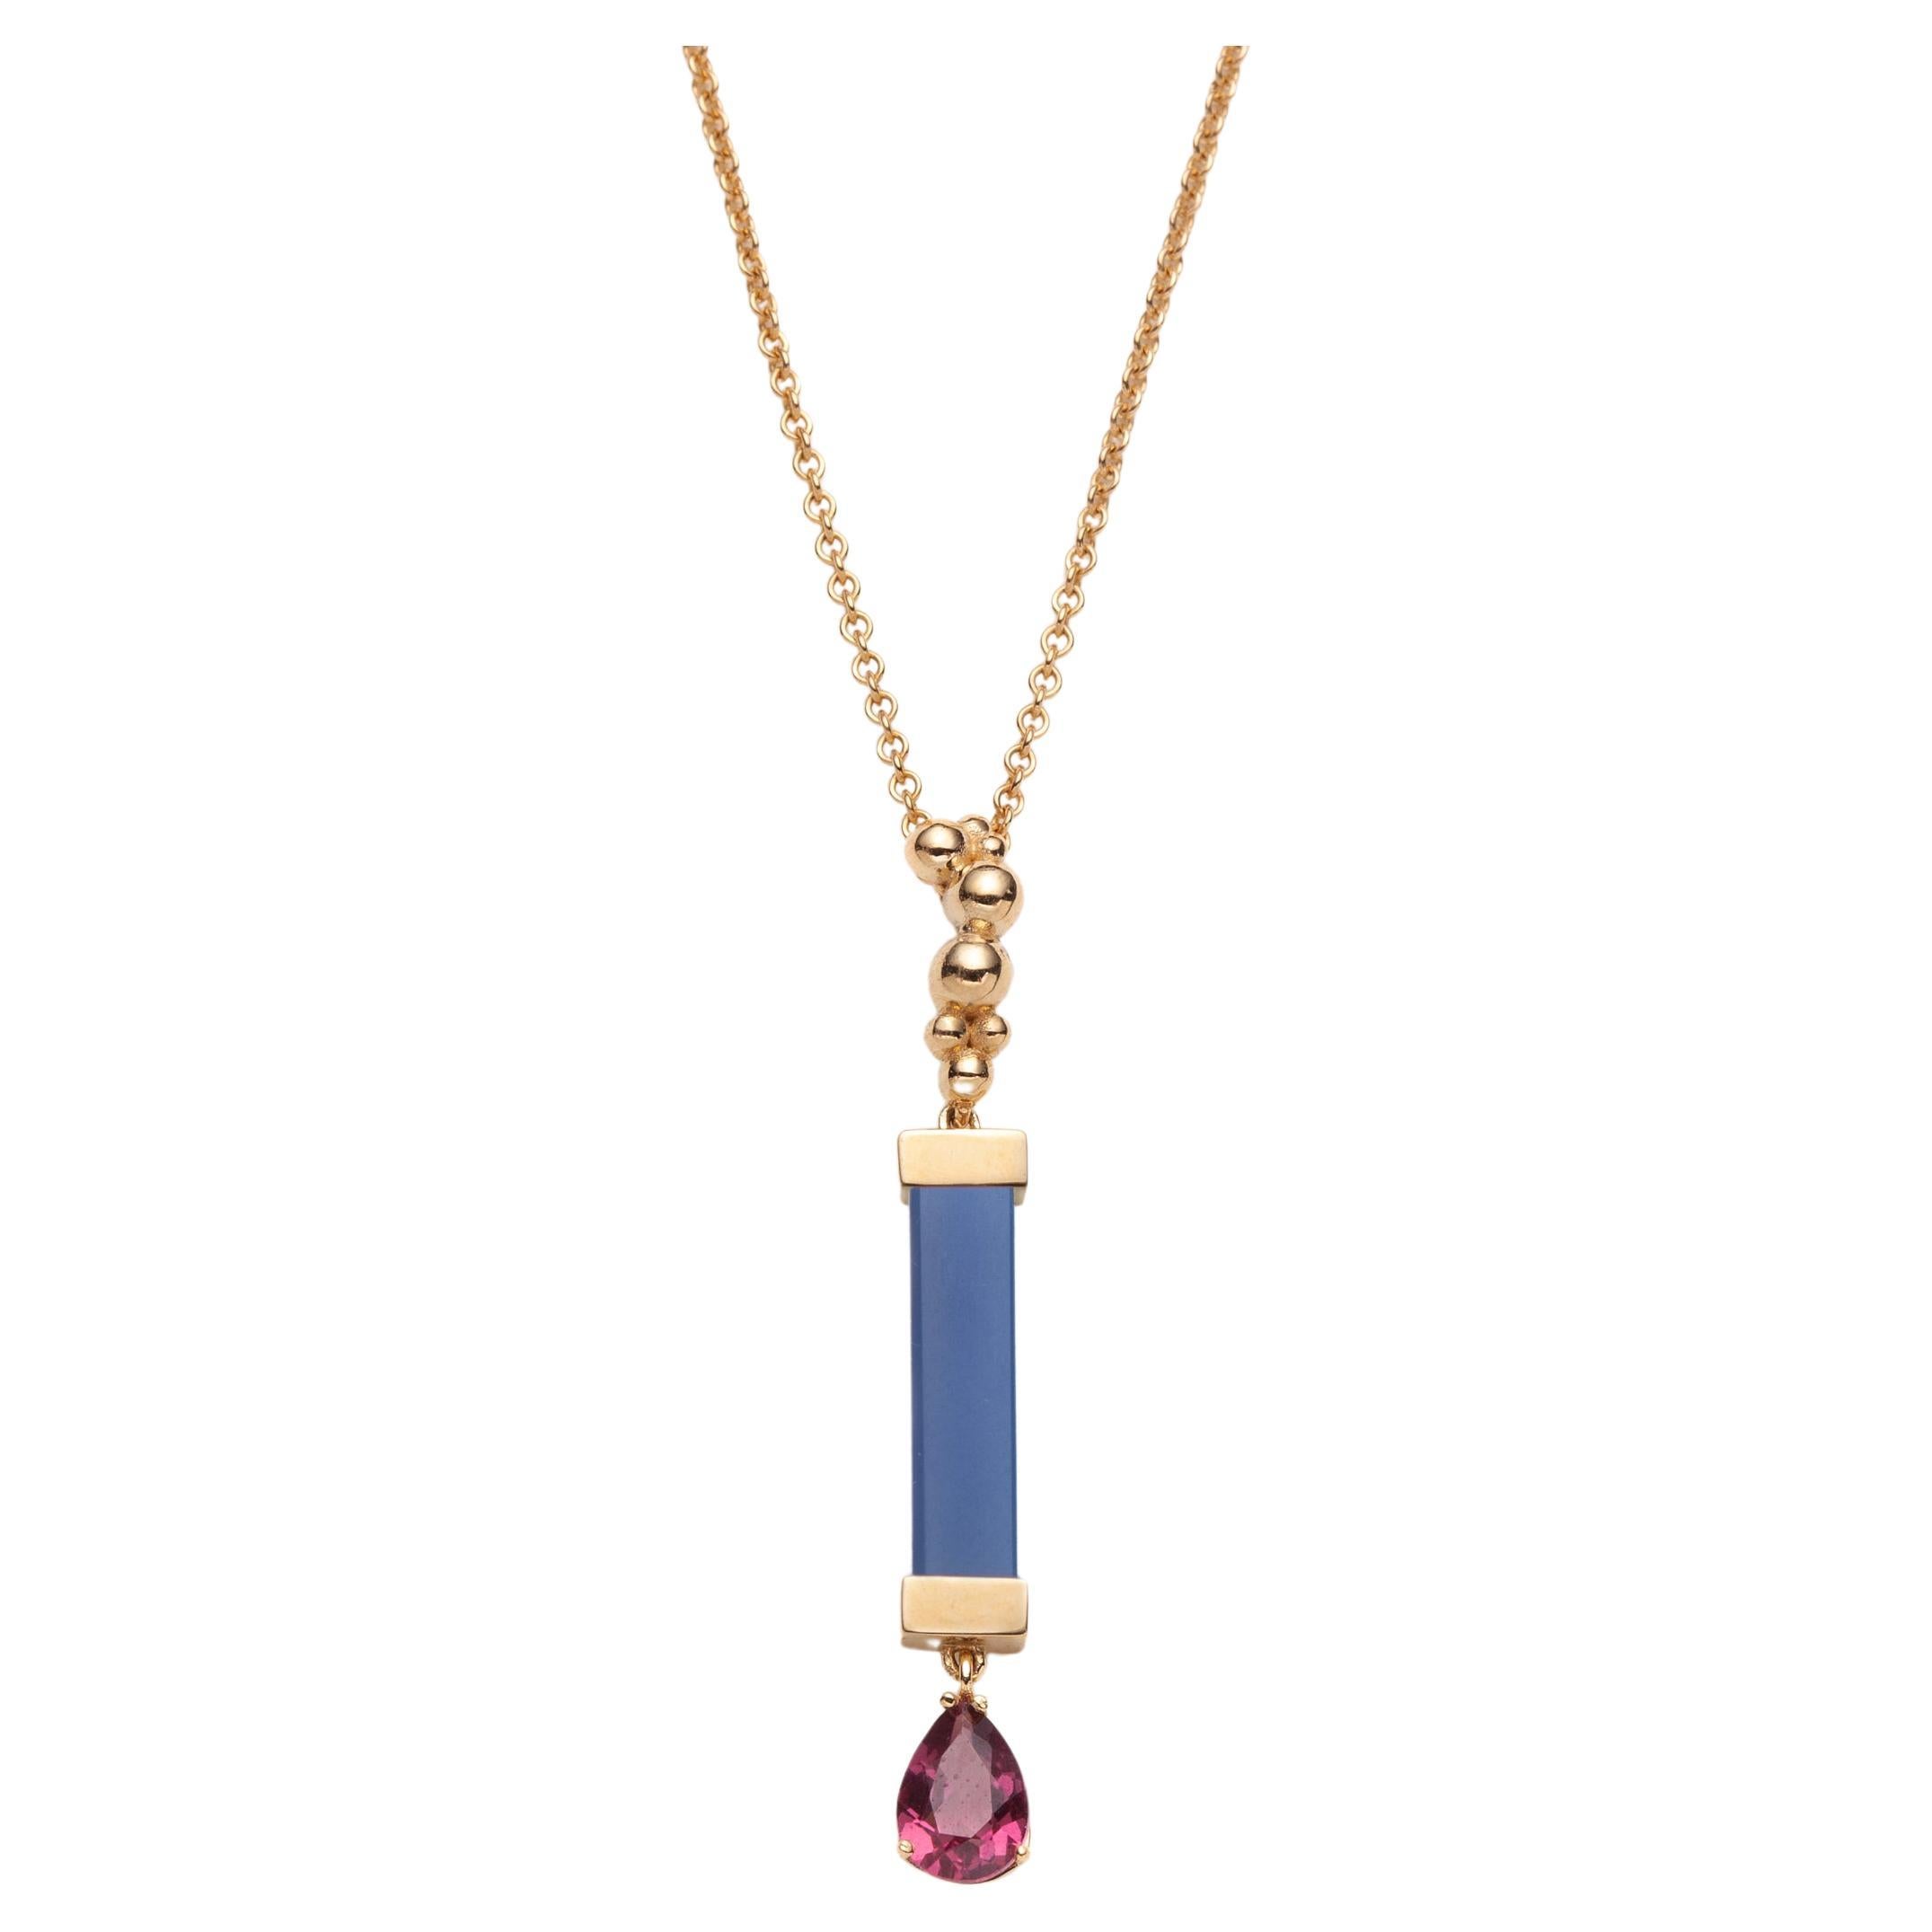 Blue agate and Rhodolite Pendant in 14K yellow Gold, by SERAFINO